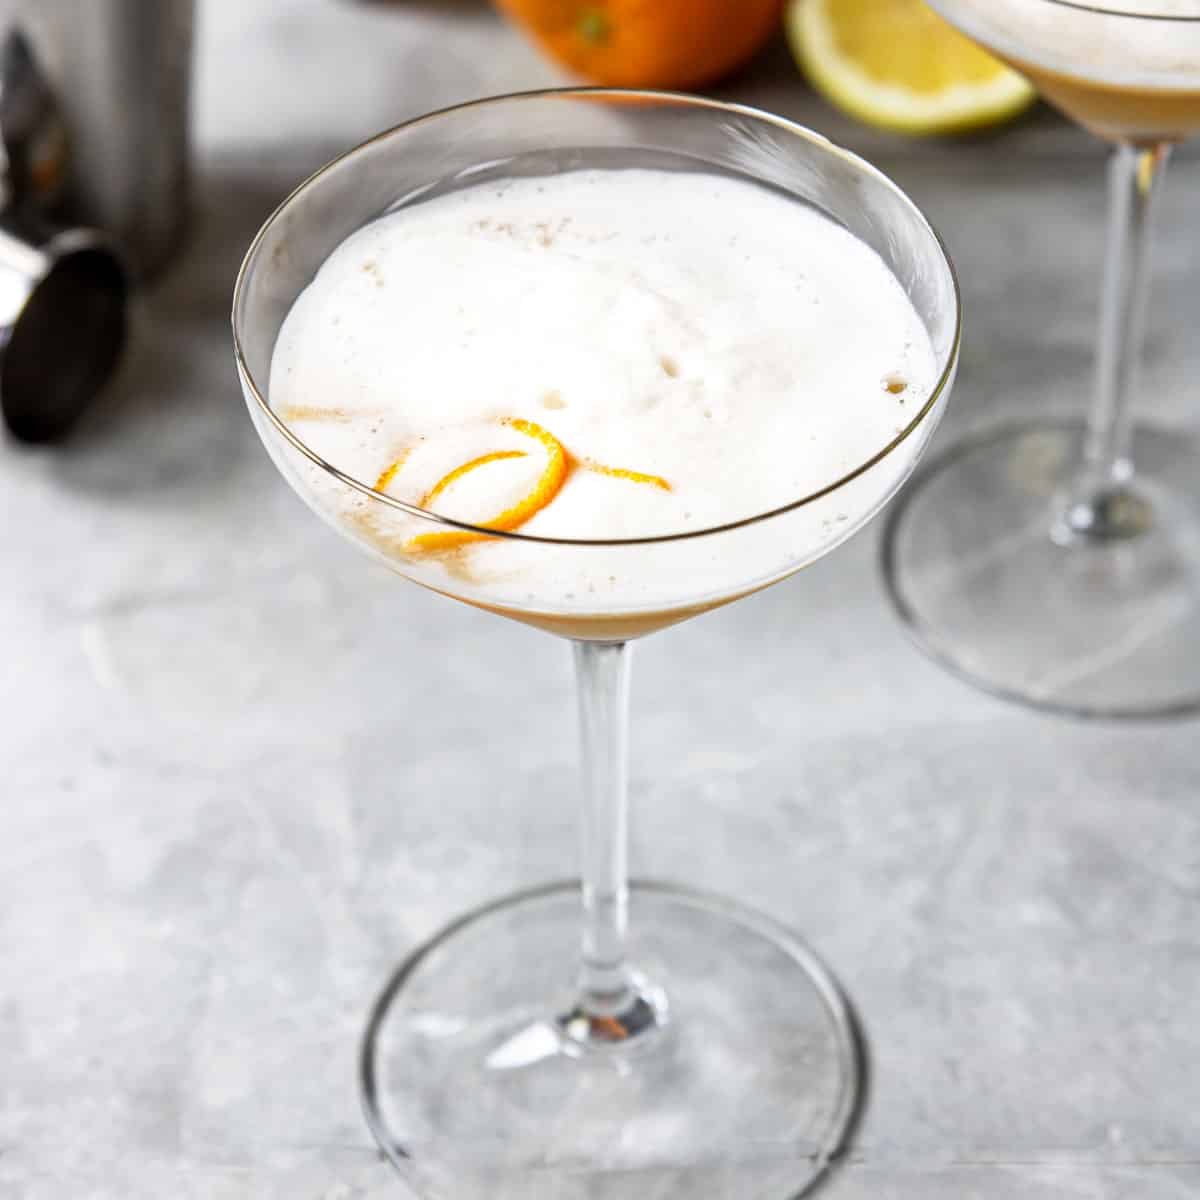 showing the egg white foam on top of a sour cocktail